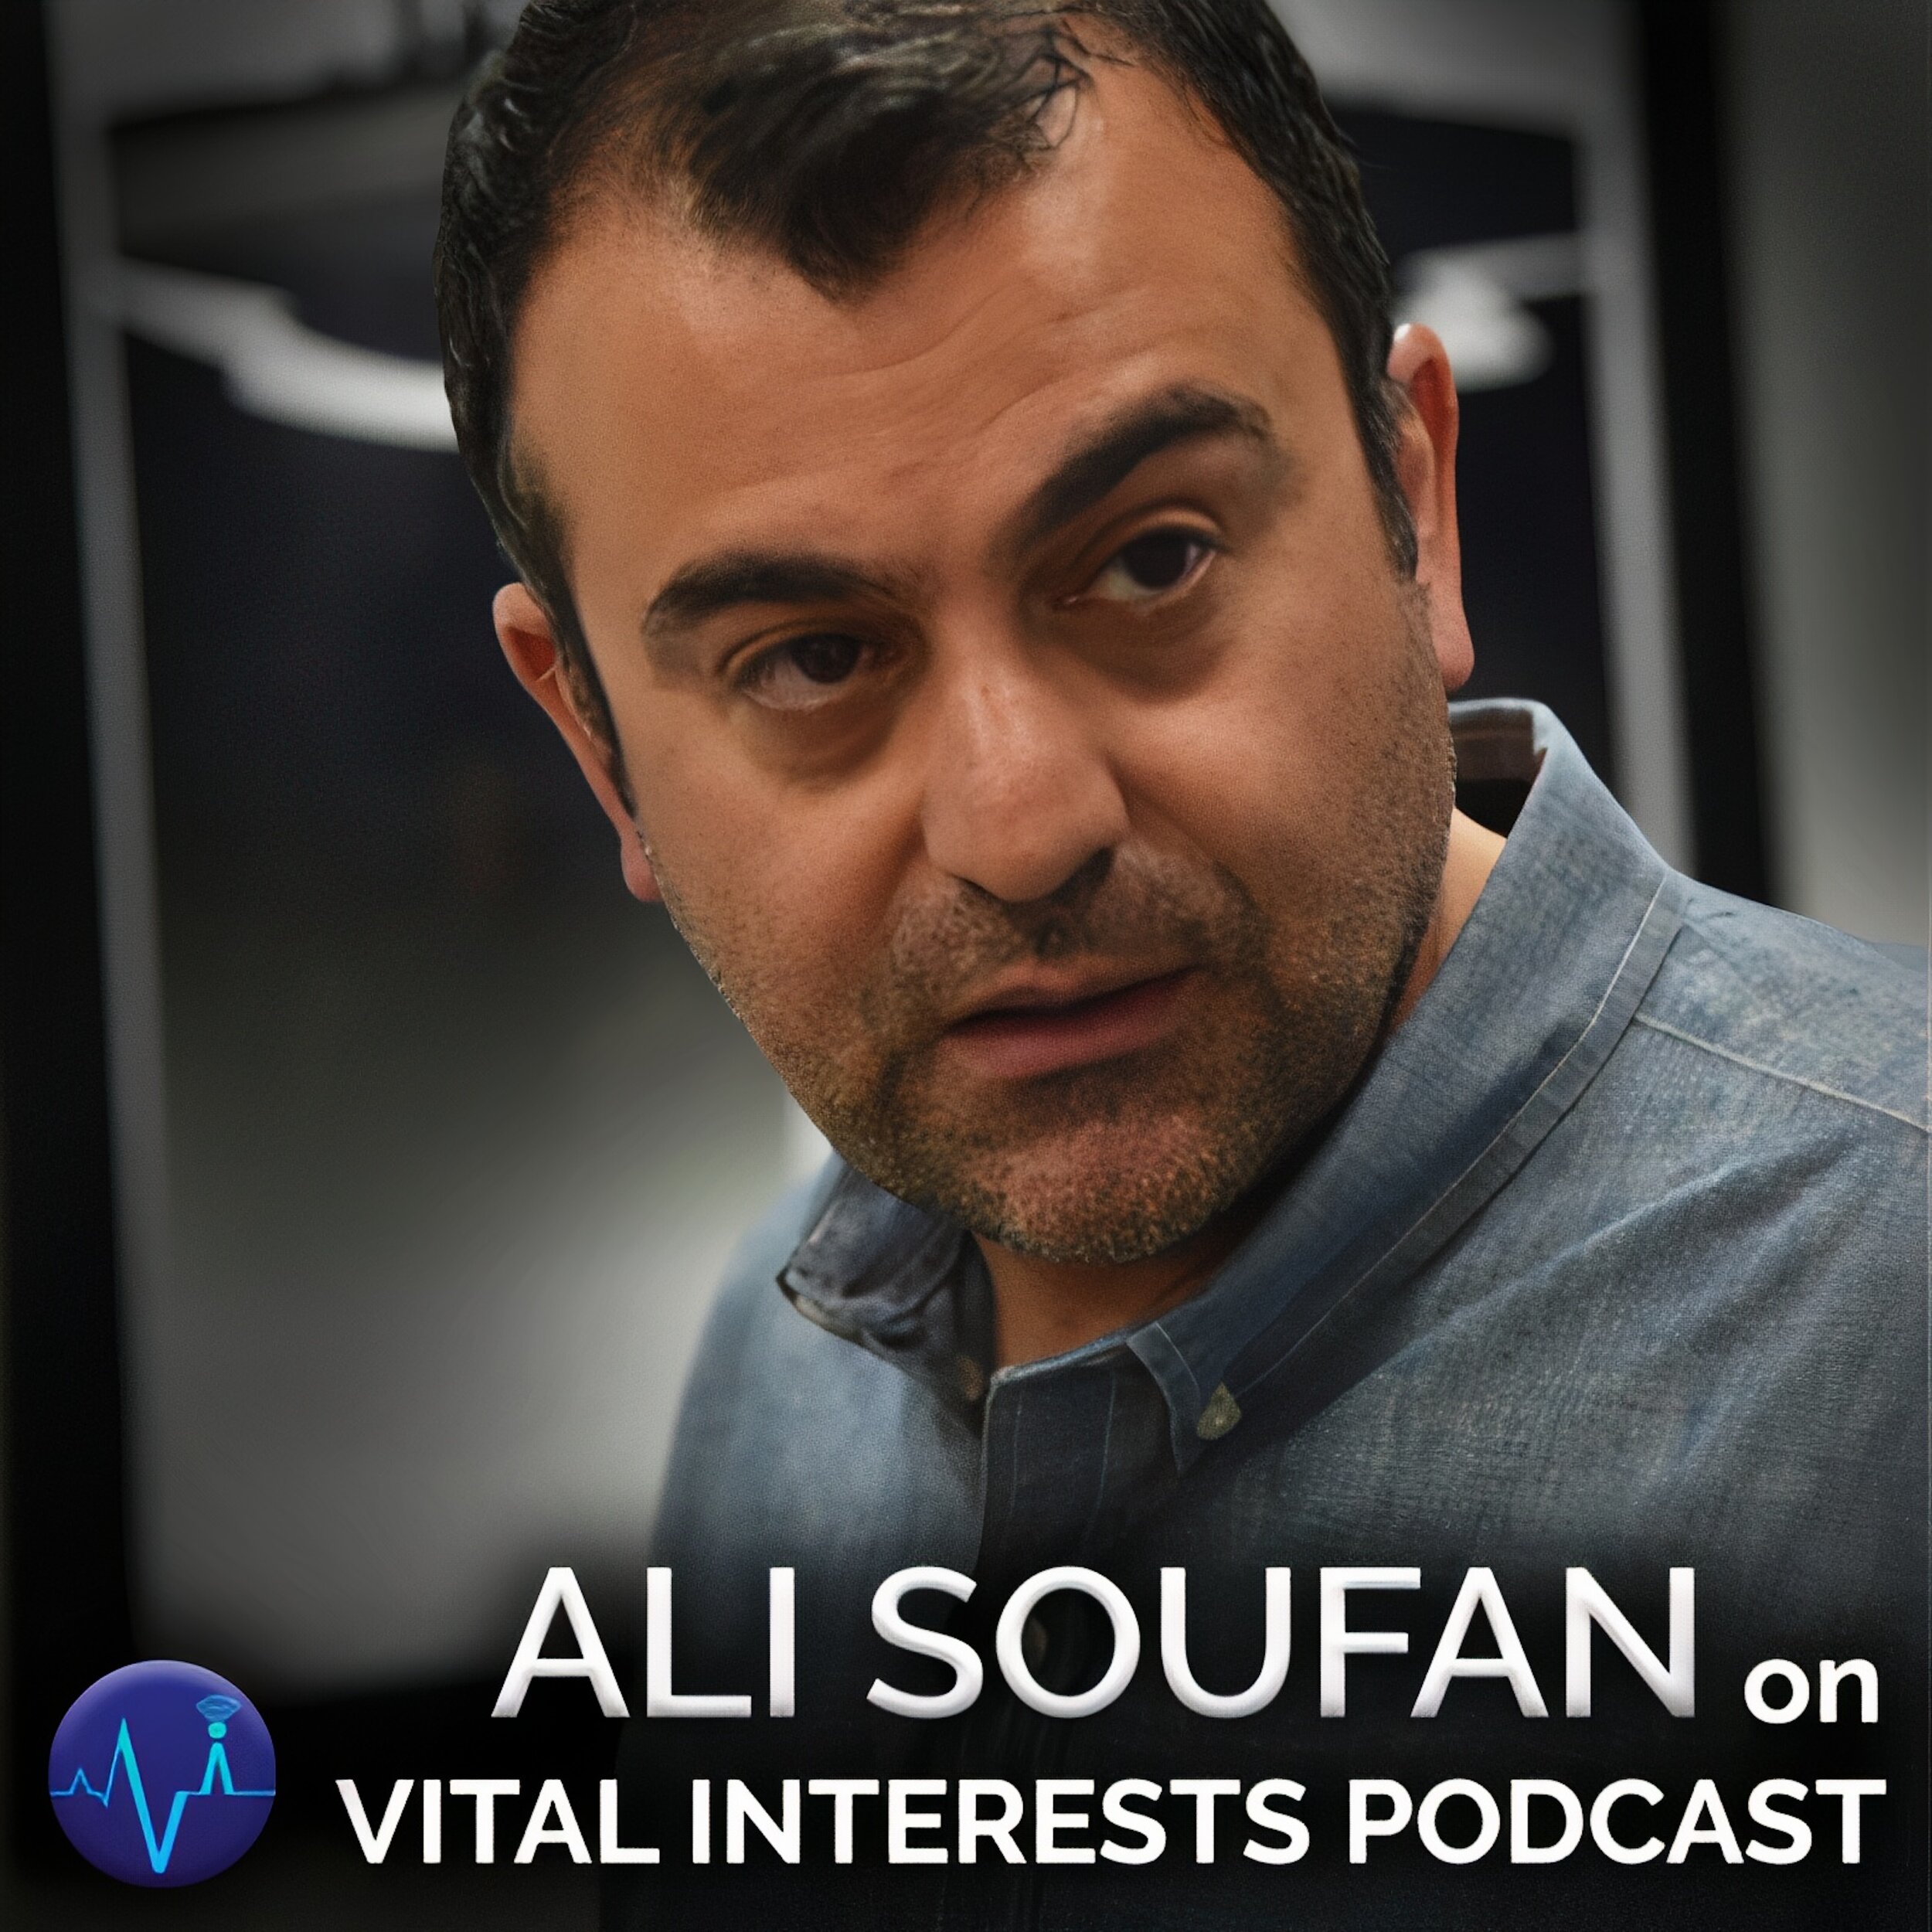 Ali Soufan on Global Security and America's Leadership Role